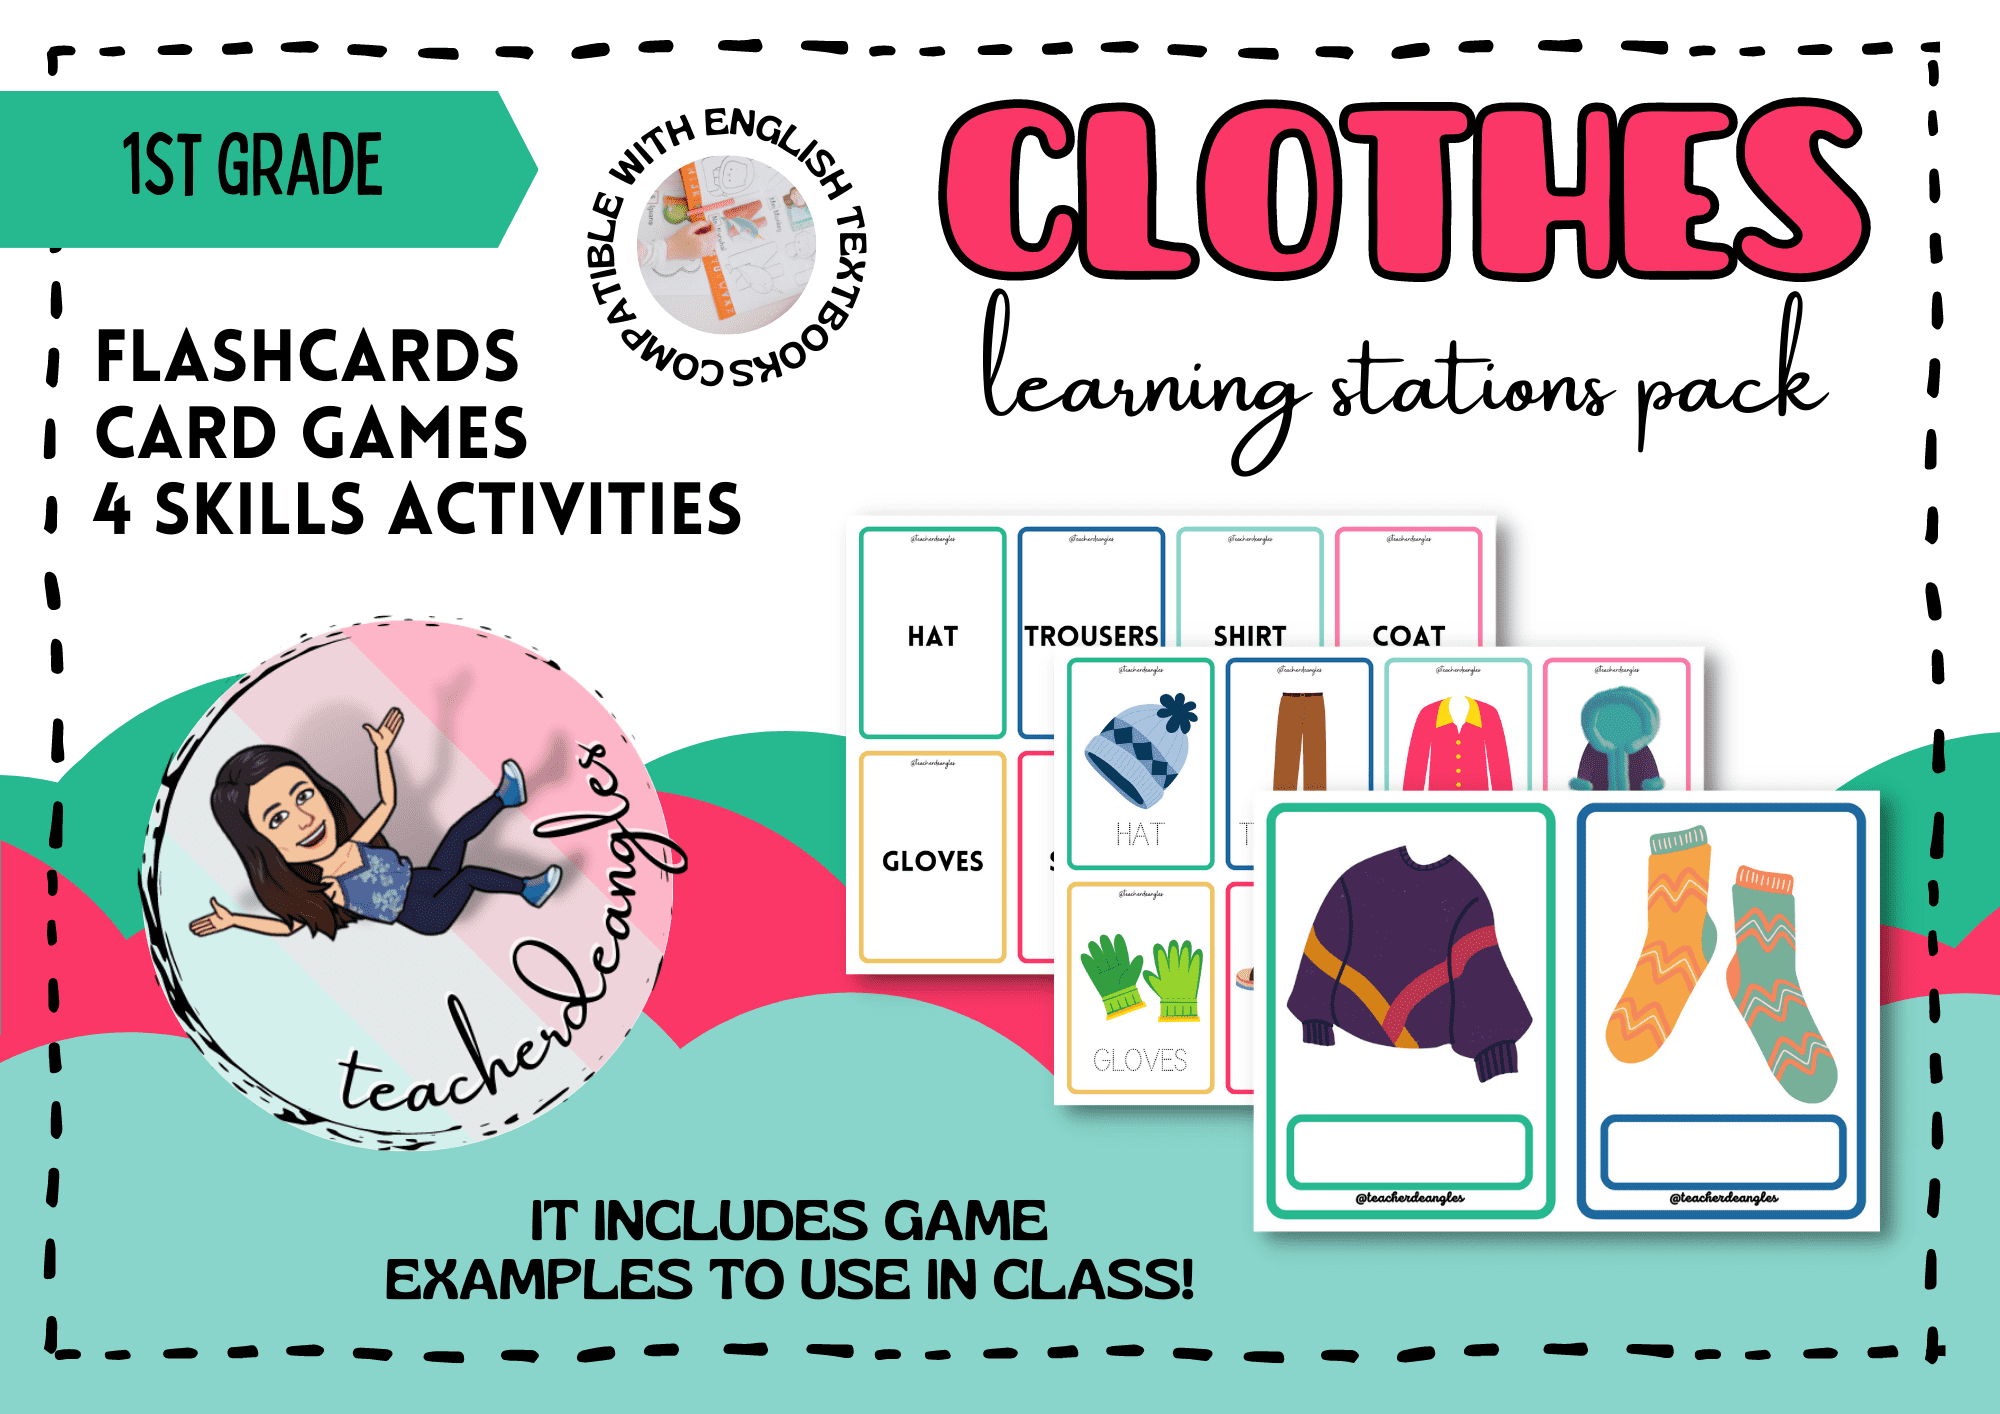 WINTER CLOTHES LEARNING STATIONS PACK